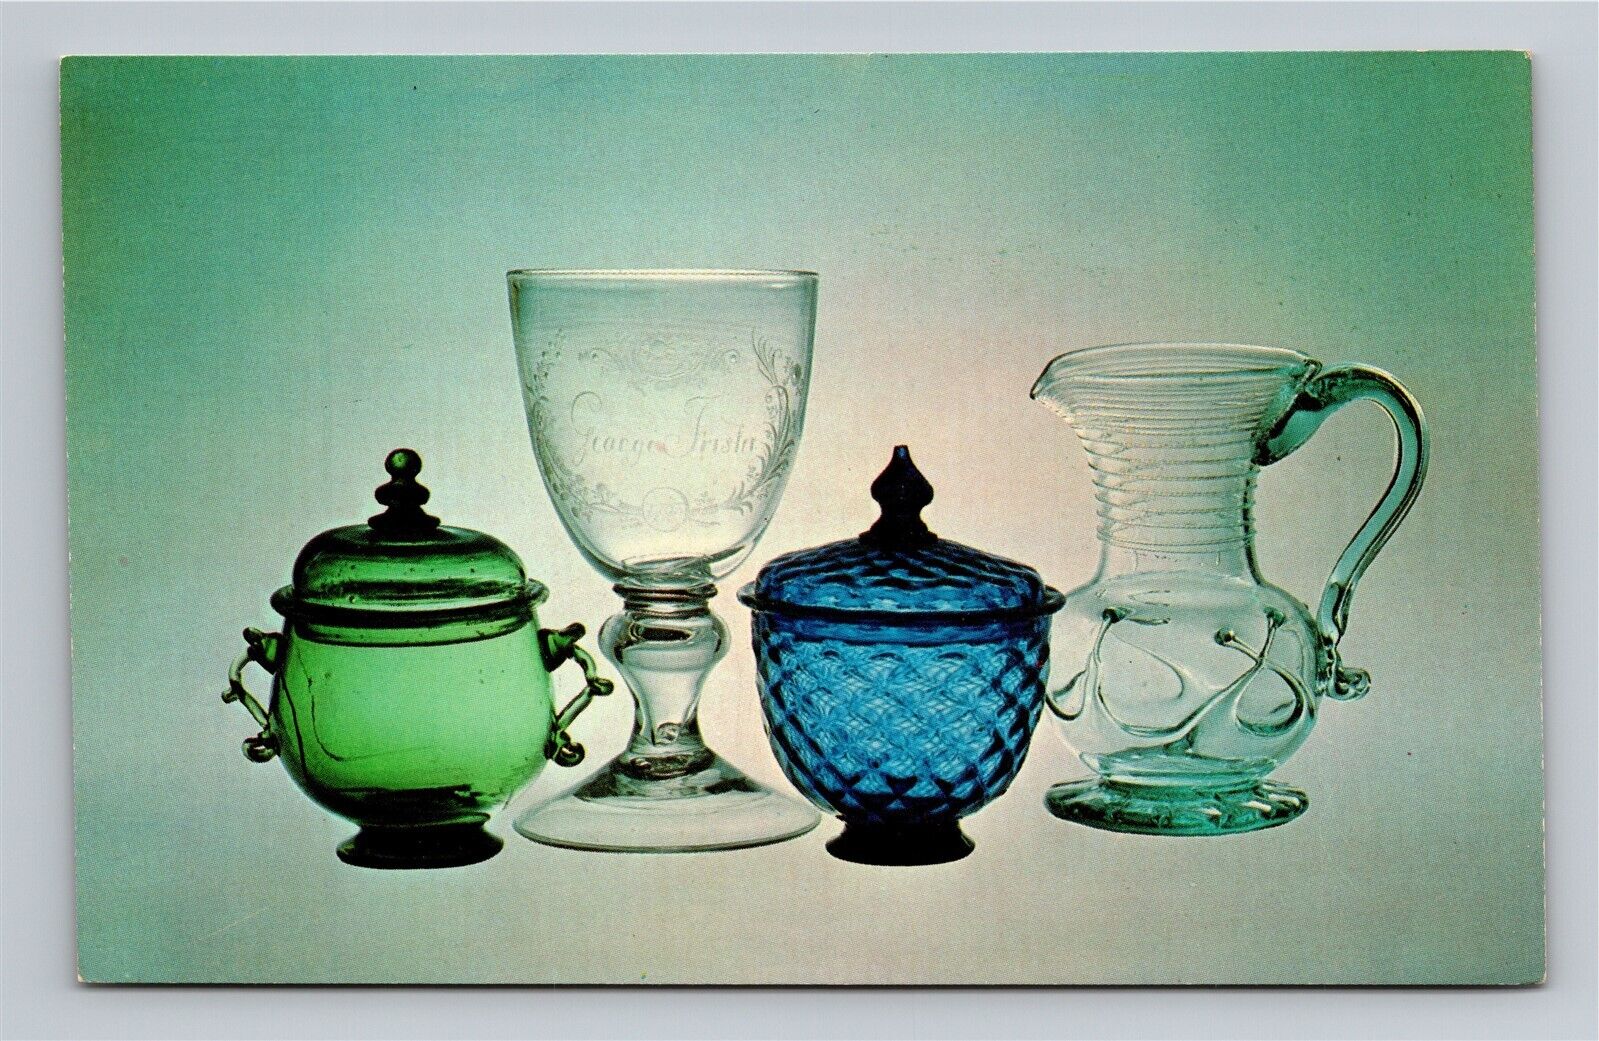 NY The Corning Museum of Glass Center Antique American Glass Vtg Postcard Unused